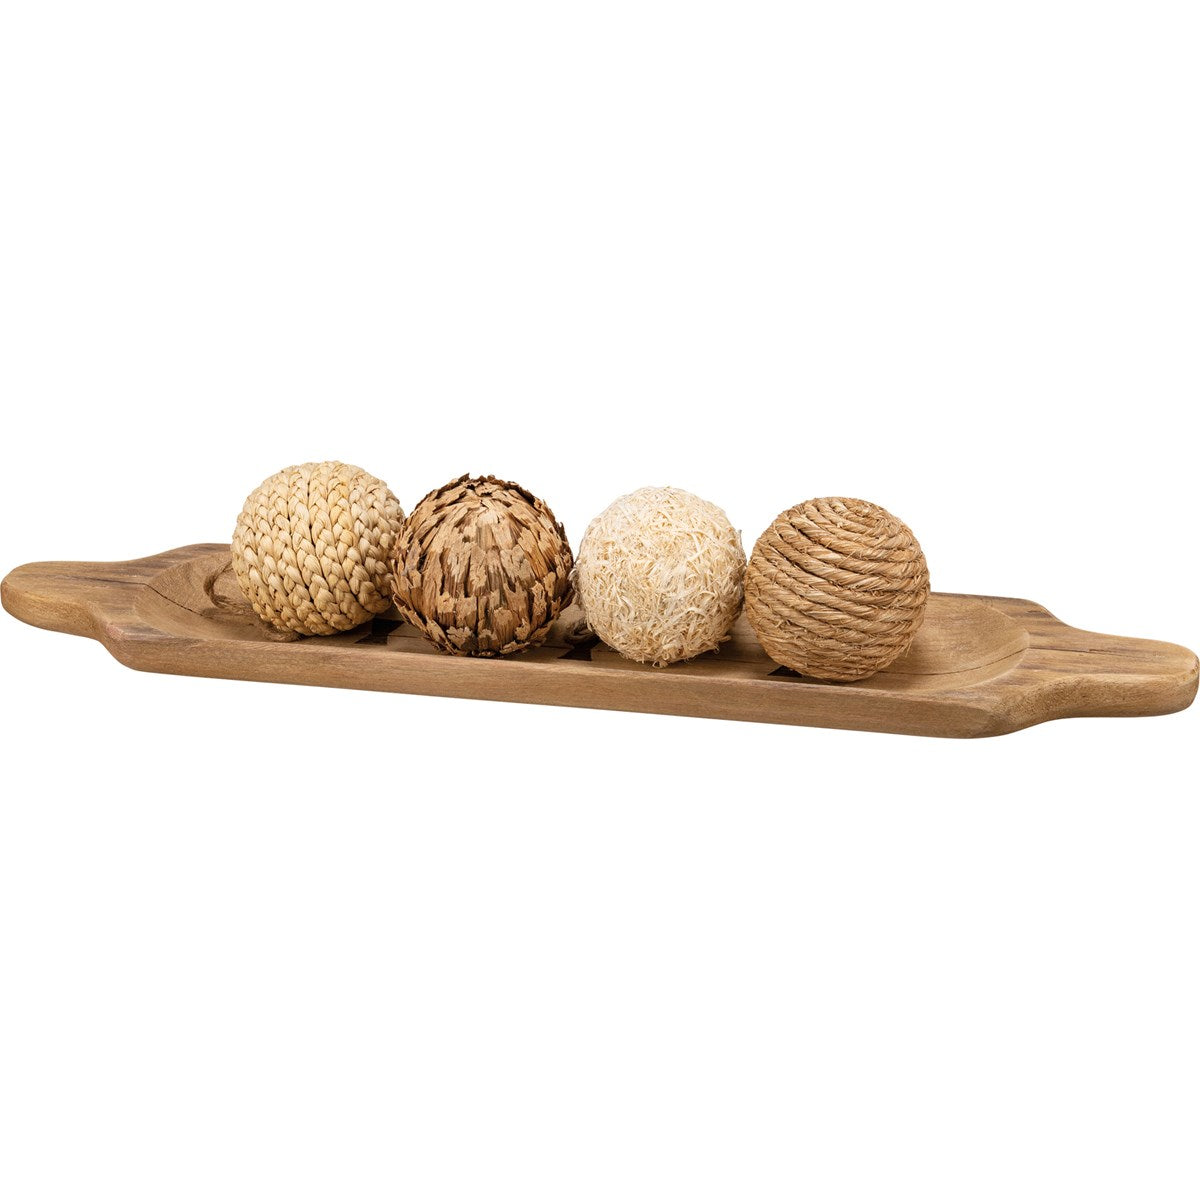 Wooden tray for home decor